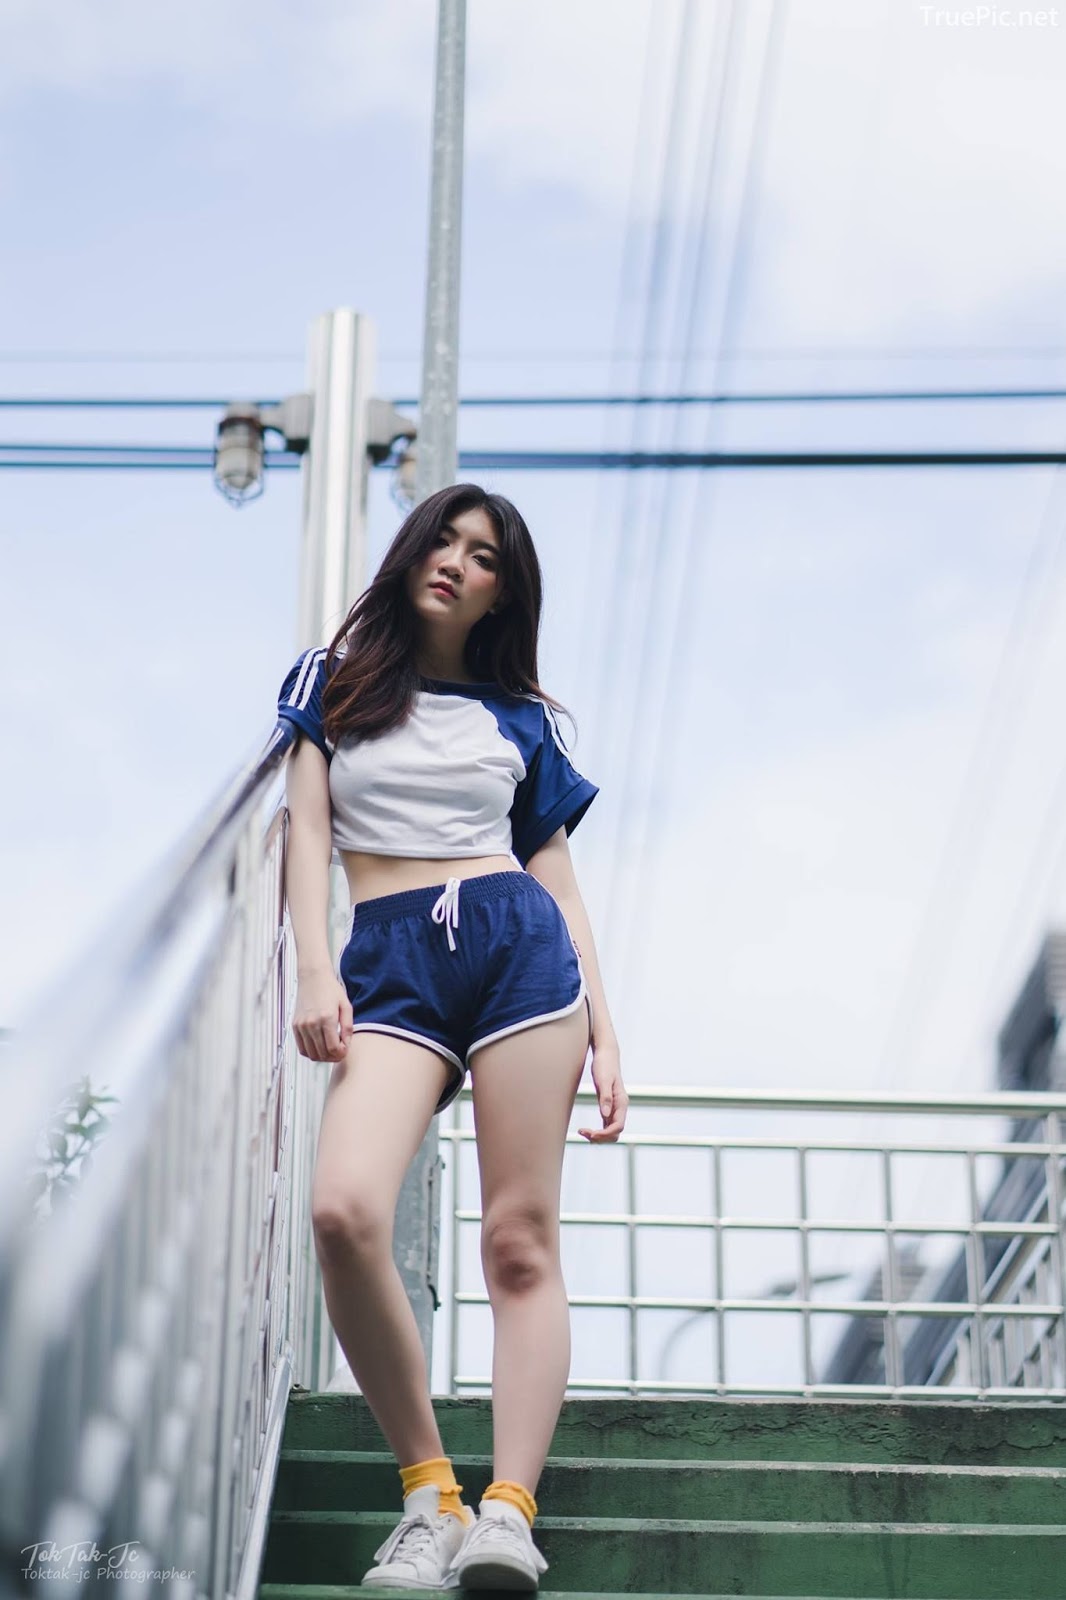 Hot Girl Thailand - Sasi Ngiunwan - Scenes From an Empty City - TruePic.net - Picture 38